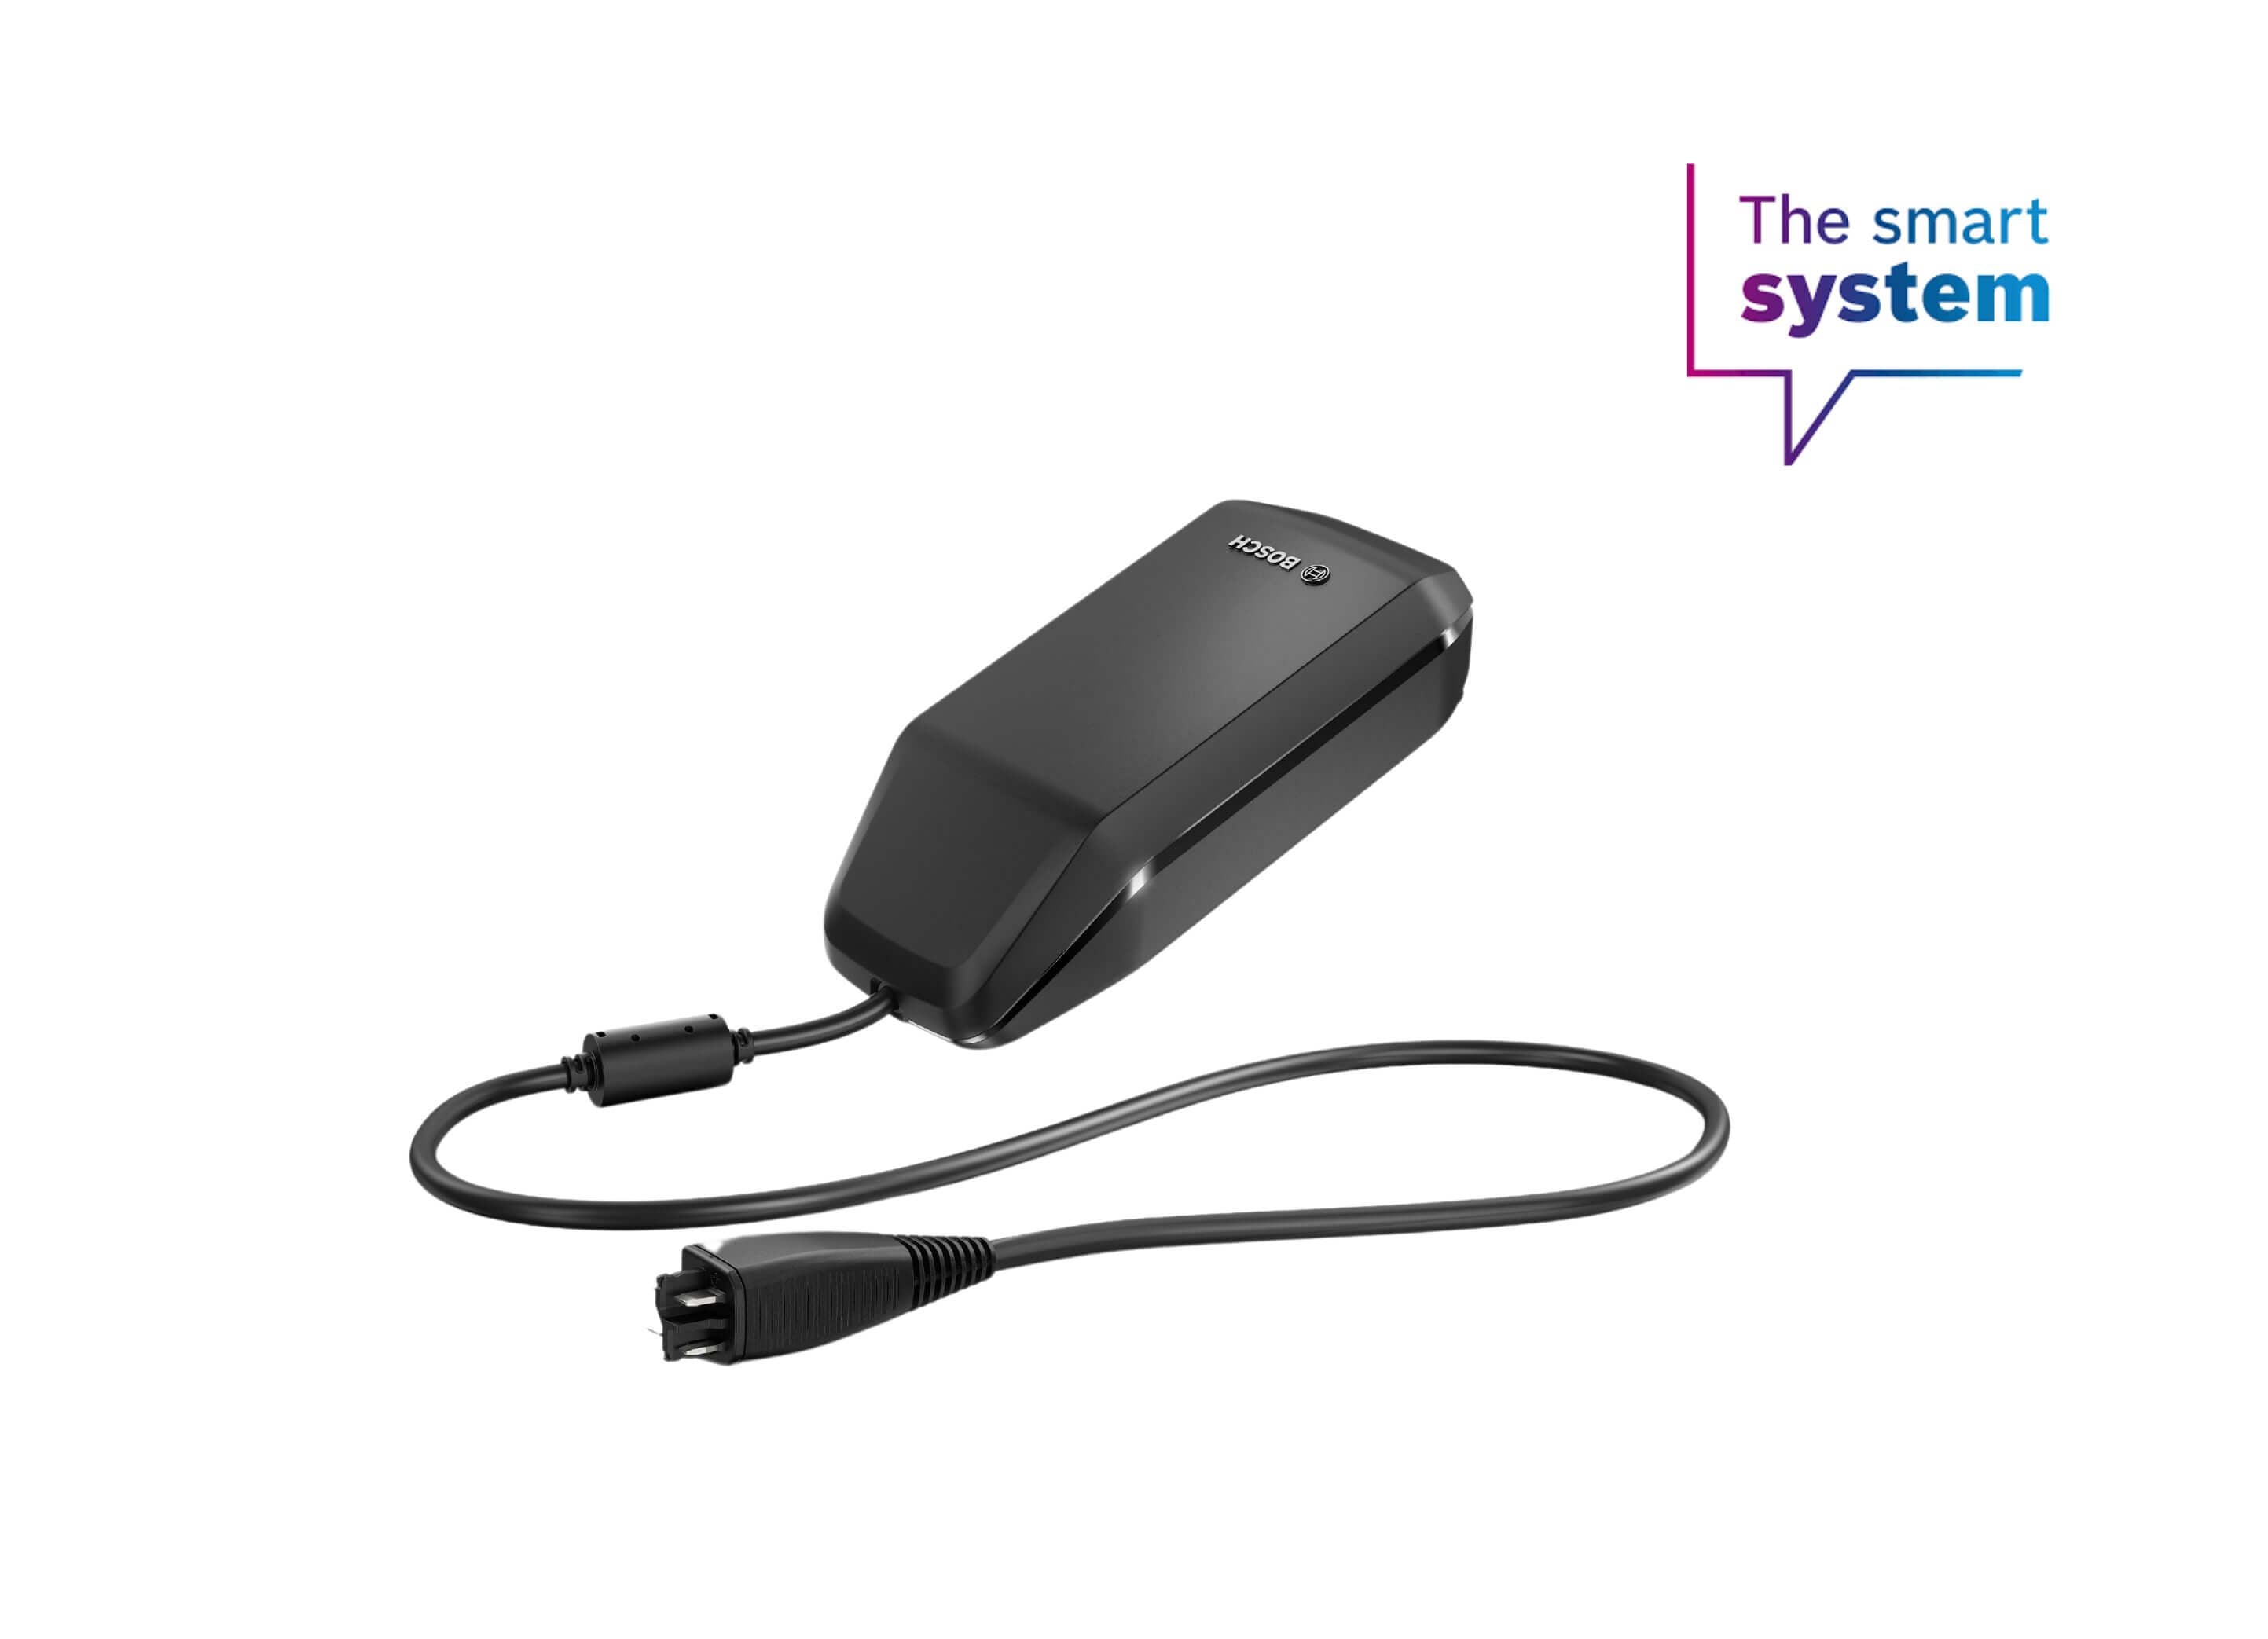 Bosch Smart System Charger 4A